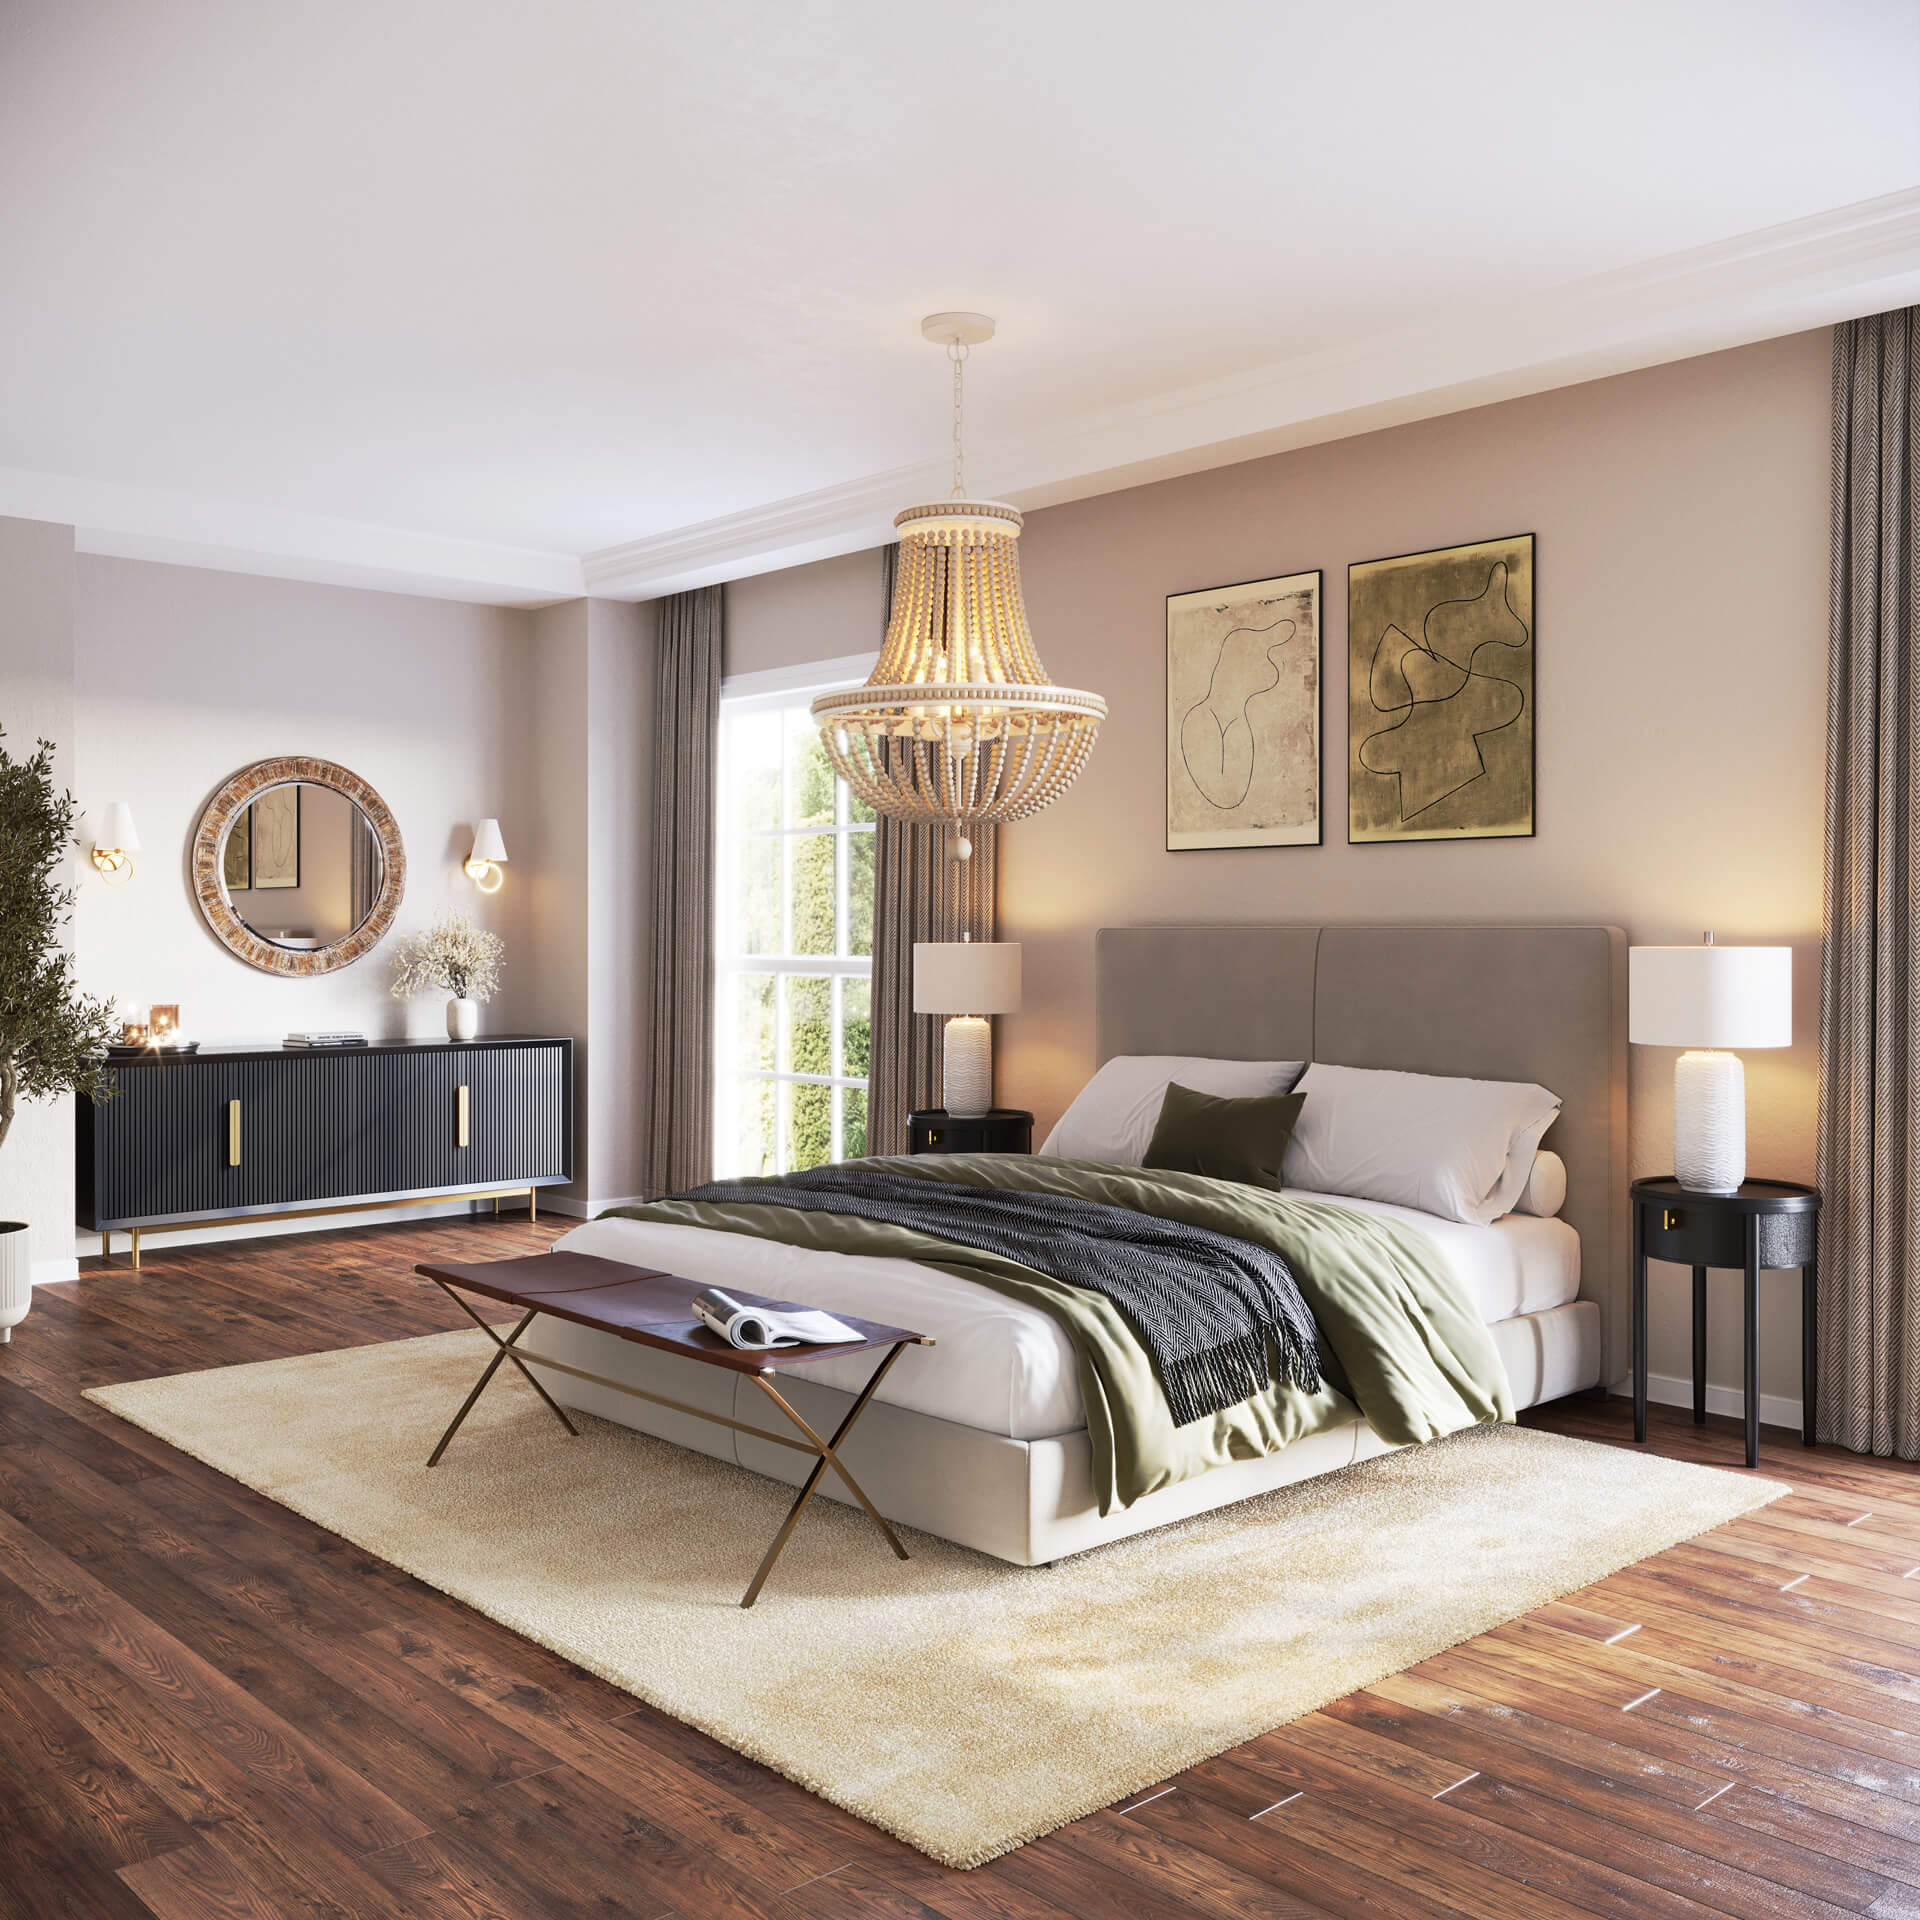 Lifestyle 3D Visualization of Light Fixtures in Bedroom